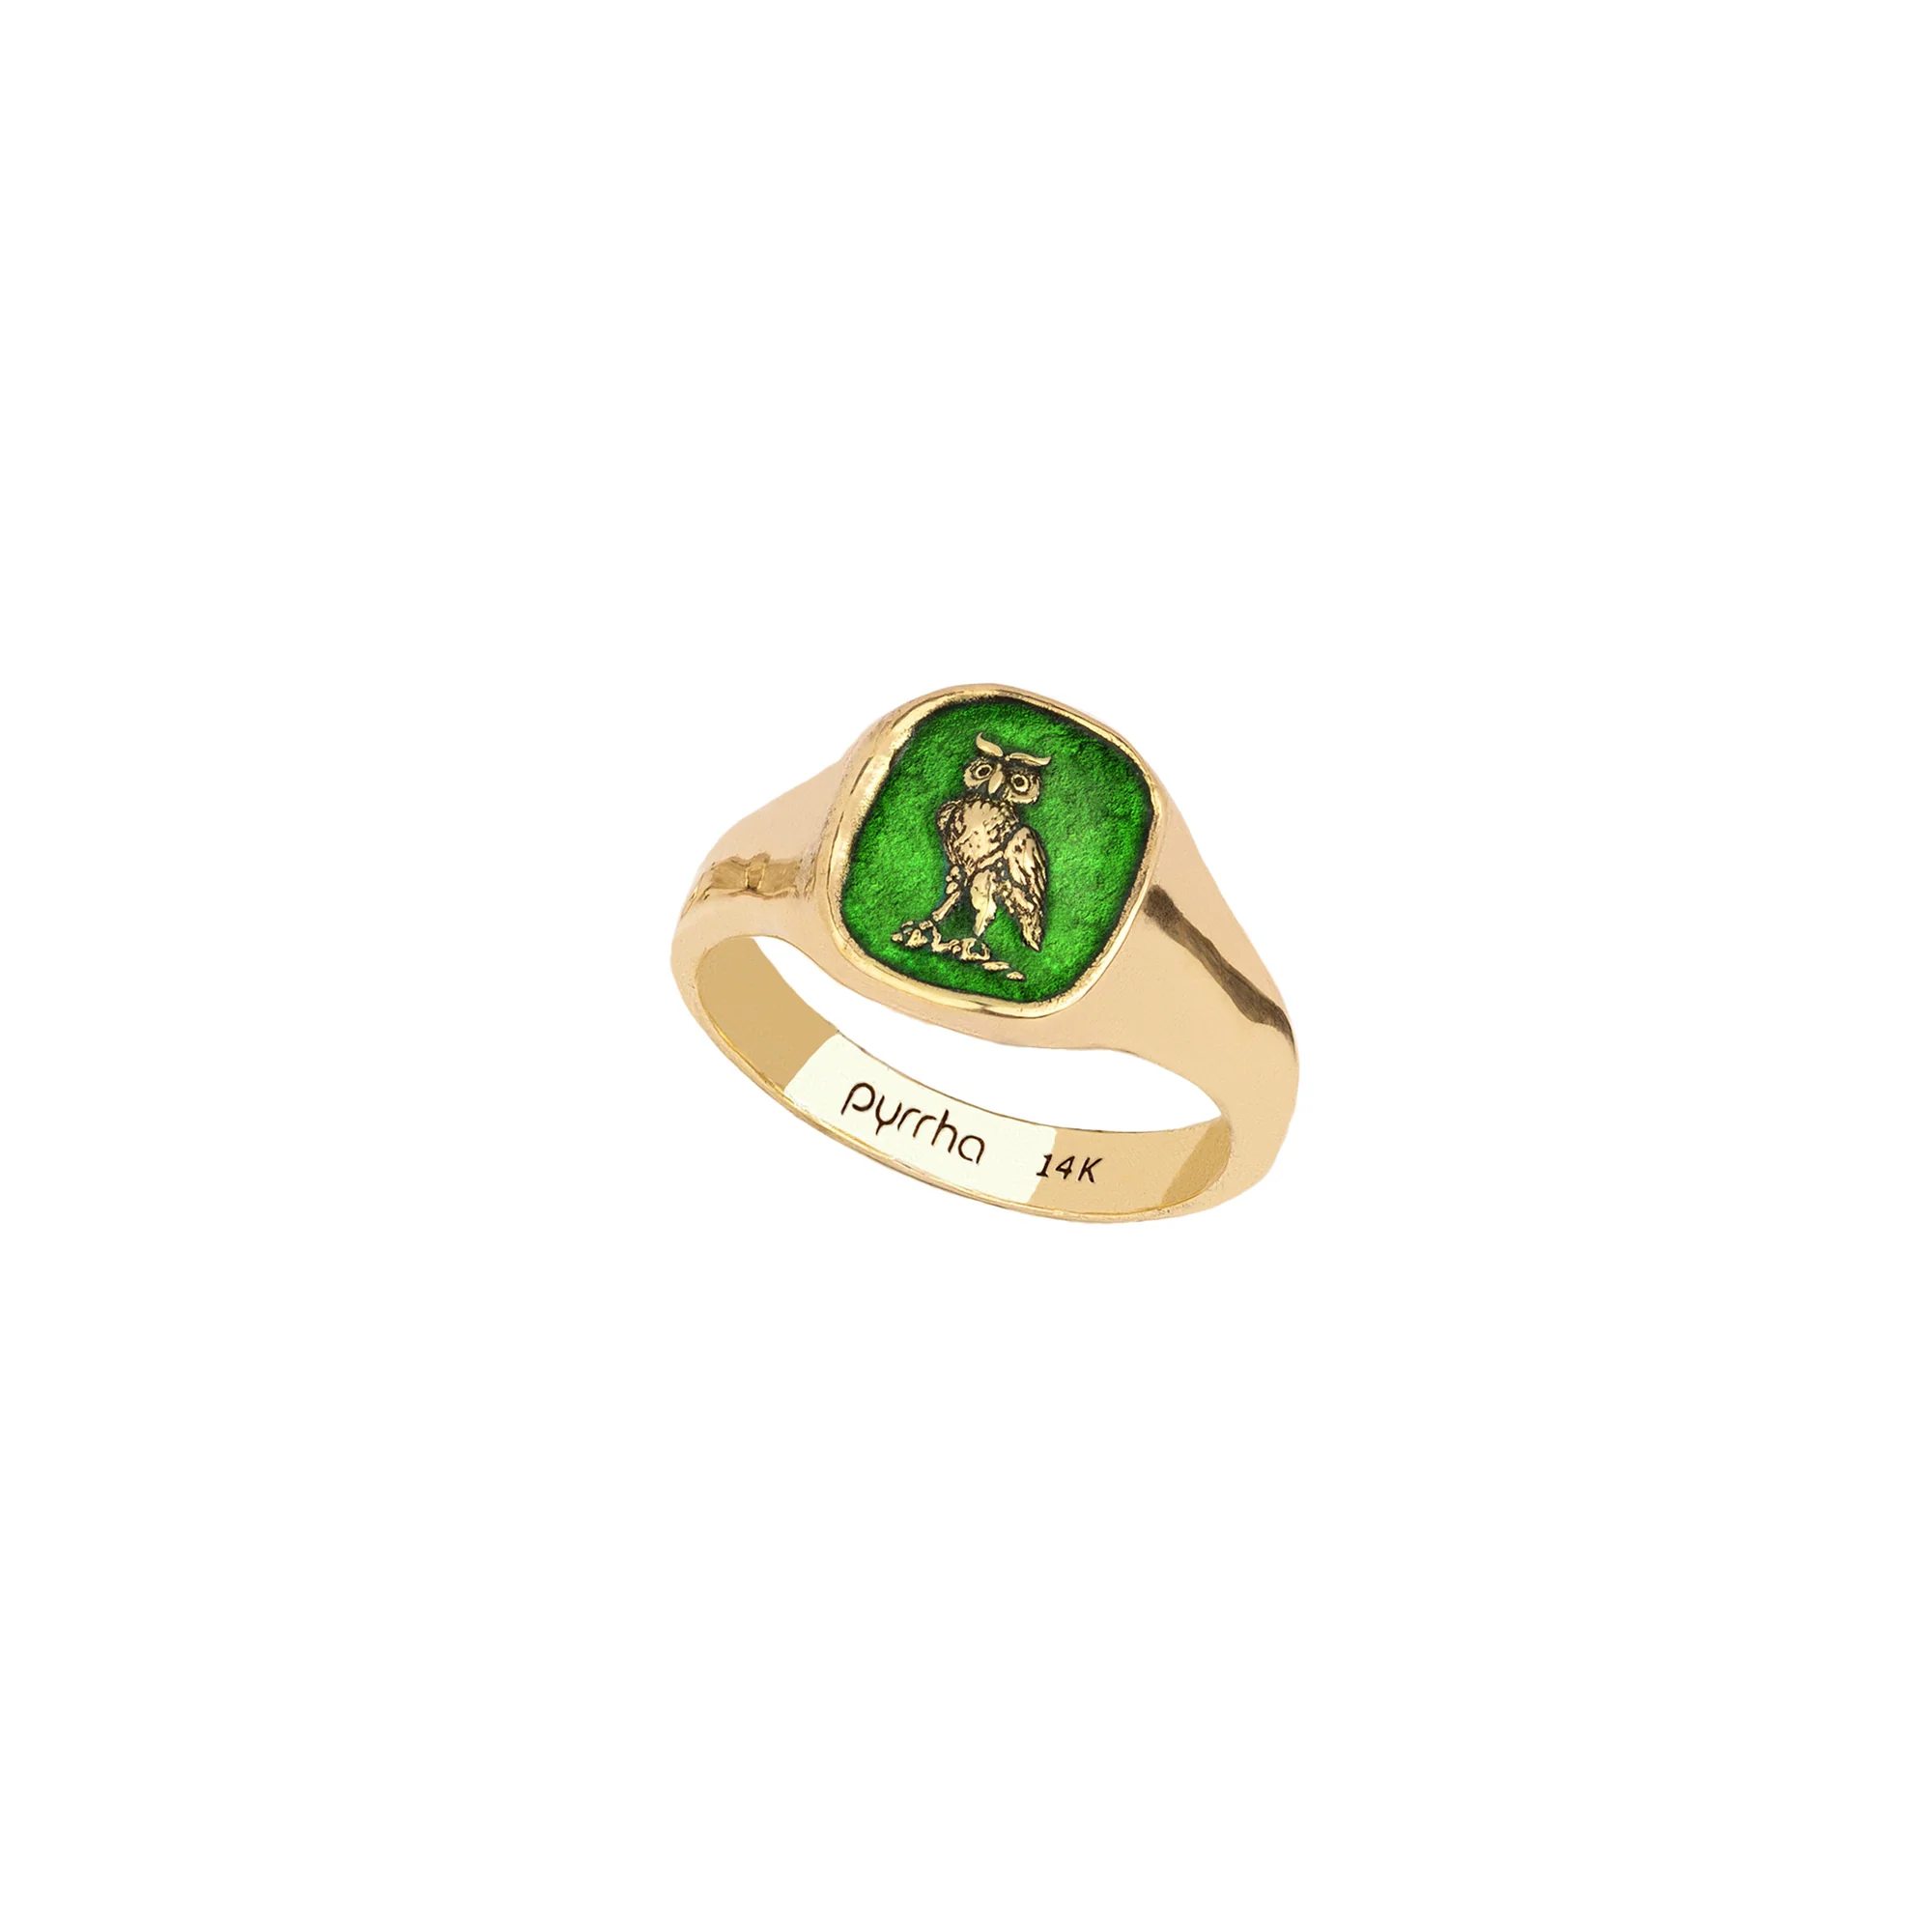 Watch Over Me 14K Gold Signet Ring - True Colors | Magpie Jewellery